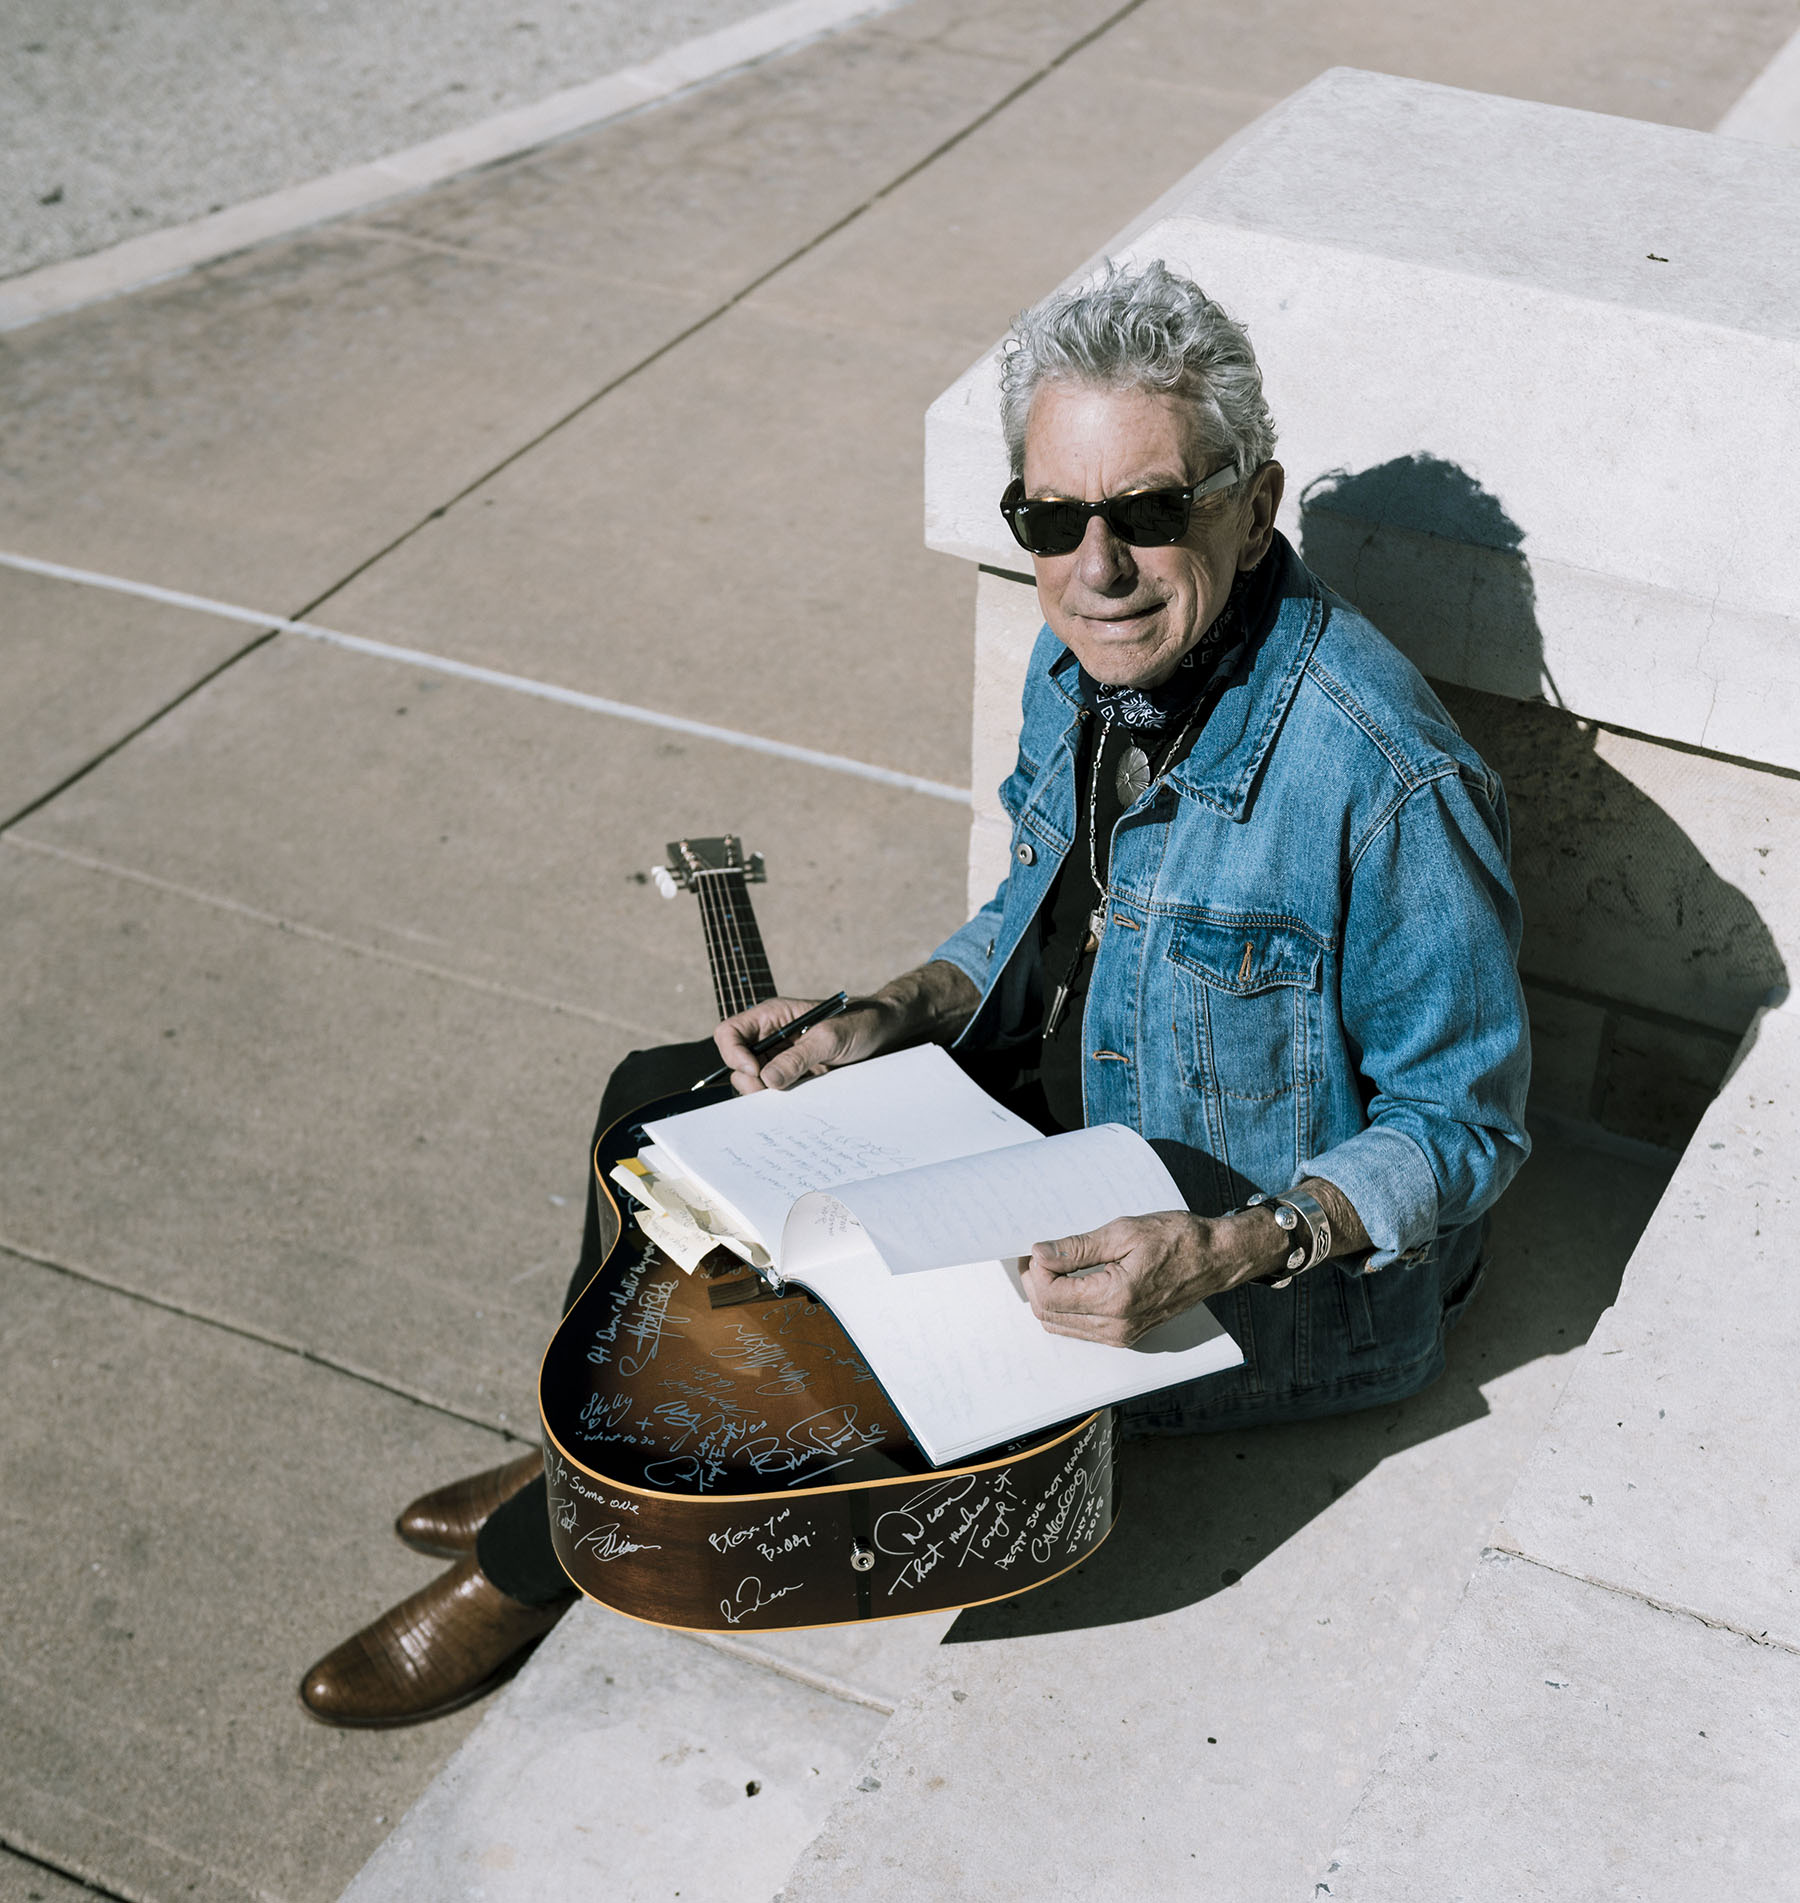 A man in a denim jacket and sunglasses sits on conrete steps with a guitar on his lap and book open over the guitar